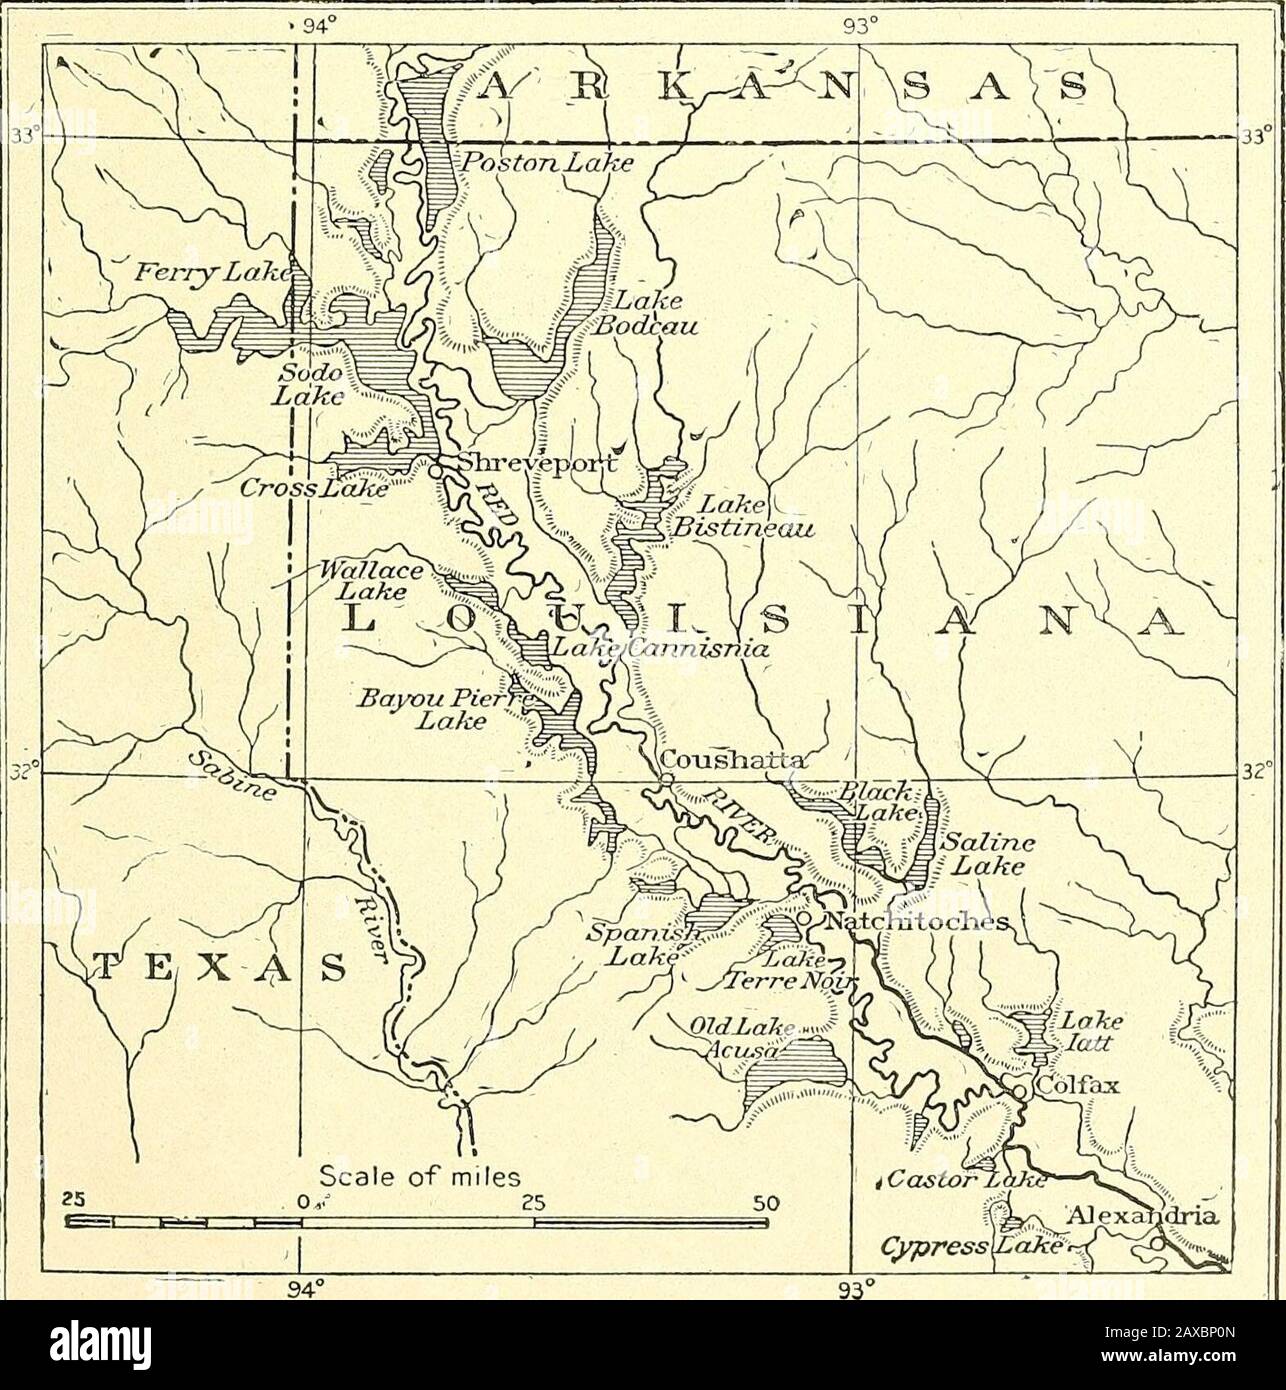 Forest physiography; physiography of the United States and principles of soils in relation to forestry . g. 214. — One of the timber jams composing the great Red River raft In buch a jam silt accumulatesvery rapidly and effectually fills the channel. (Veatch, U. S. Geo!. Surv.). Fig. 213. — Lakes of the Red River valley in Louisiana at their fullest recorded development. (Veatch, U. S. Geol. Surv.) p. S35 536 FOREST PHYSIOGRAPHY Stock Photo